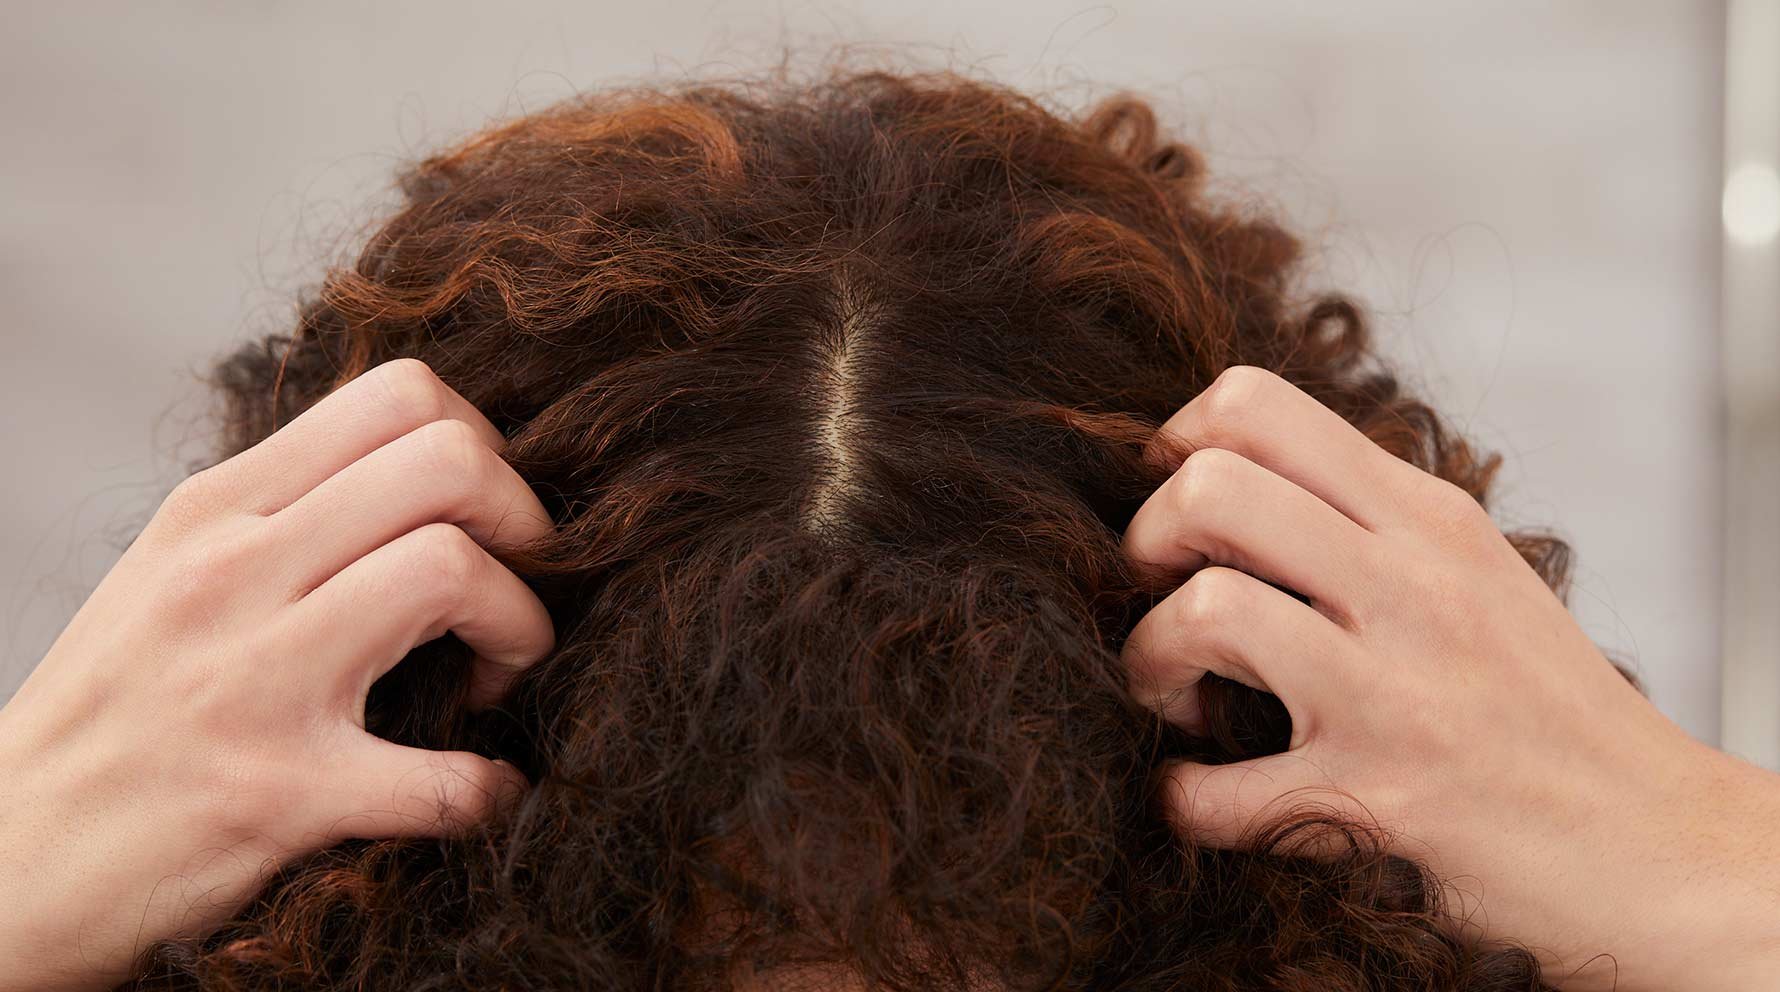 12 Causes Of An Itchy Scalp According To Dermatologists